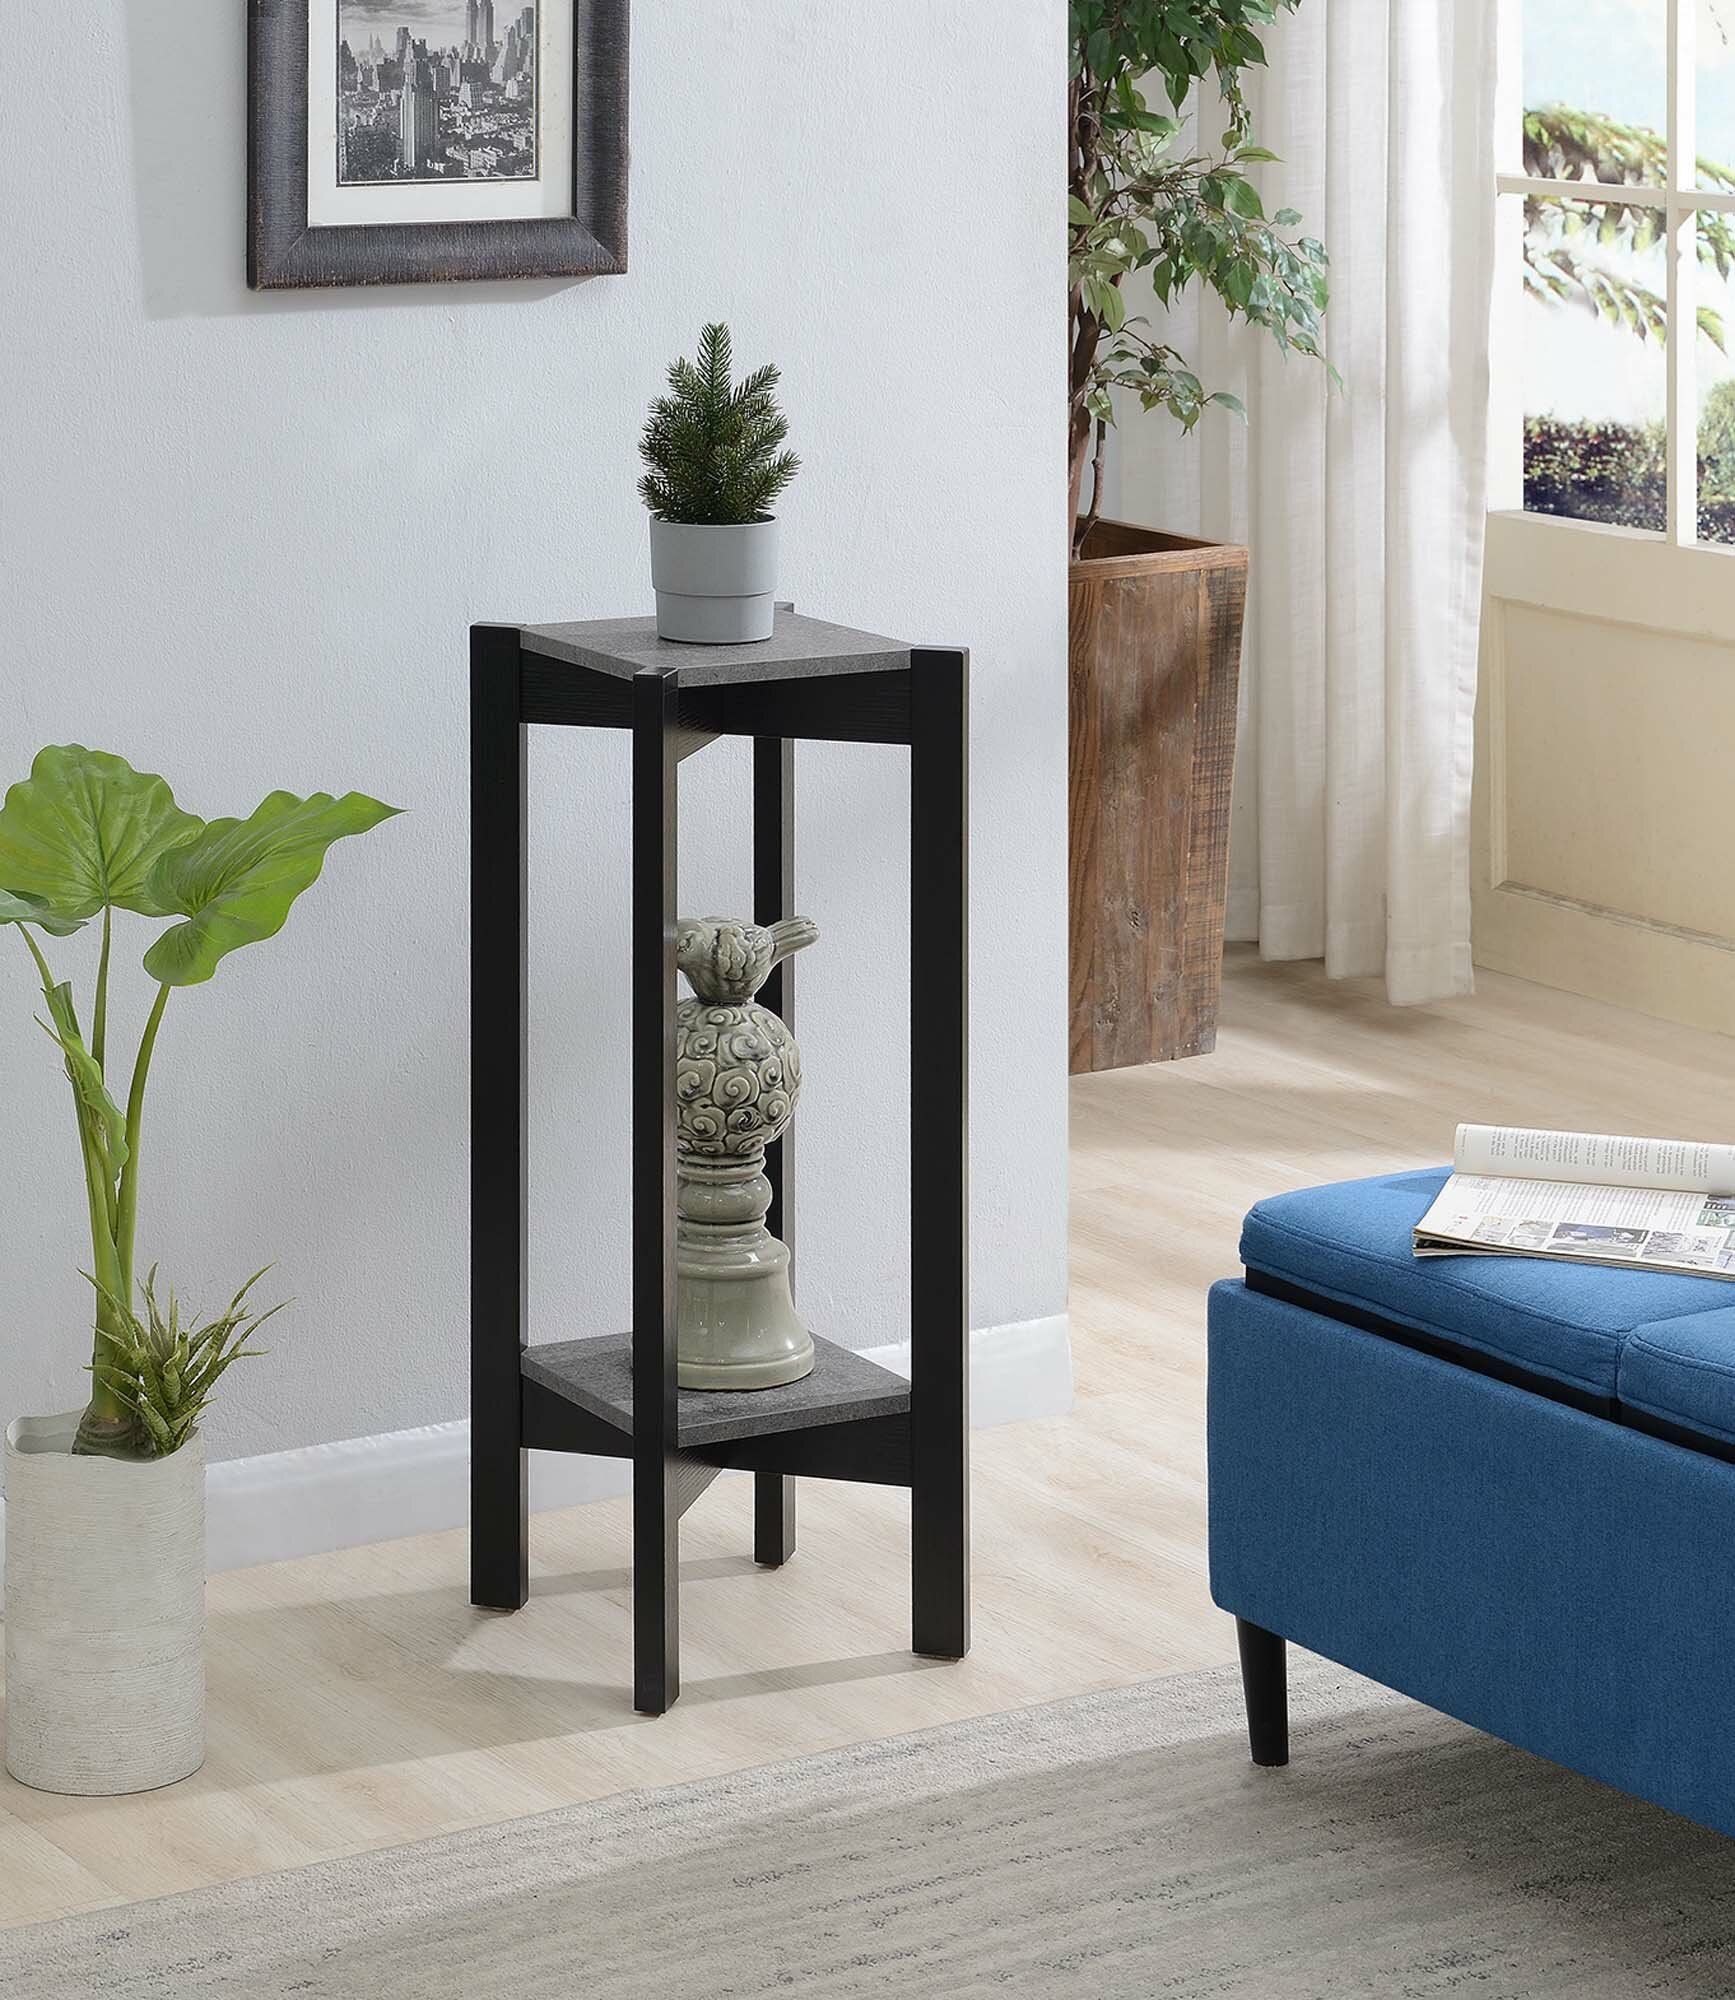 Ebern Designs Corto Square Pedestal Plant Stand & Reviews | Wayfair In Iron Square Plant Stands (View 15 of 15)